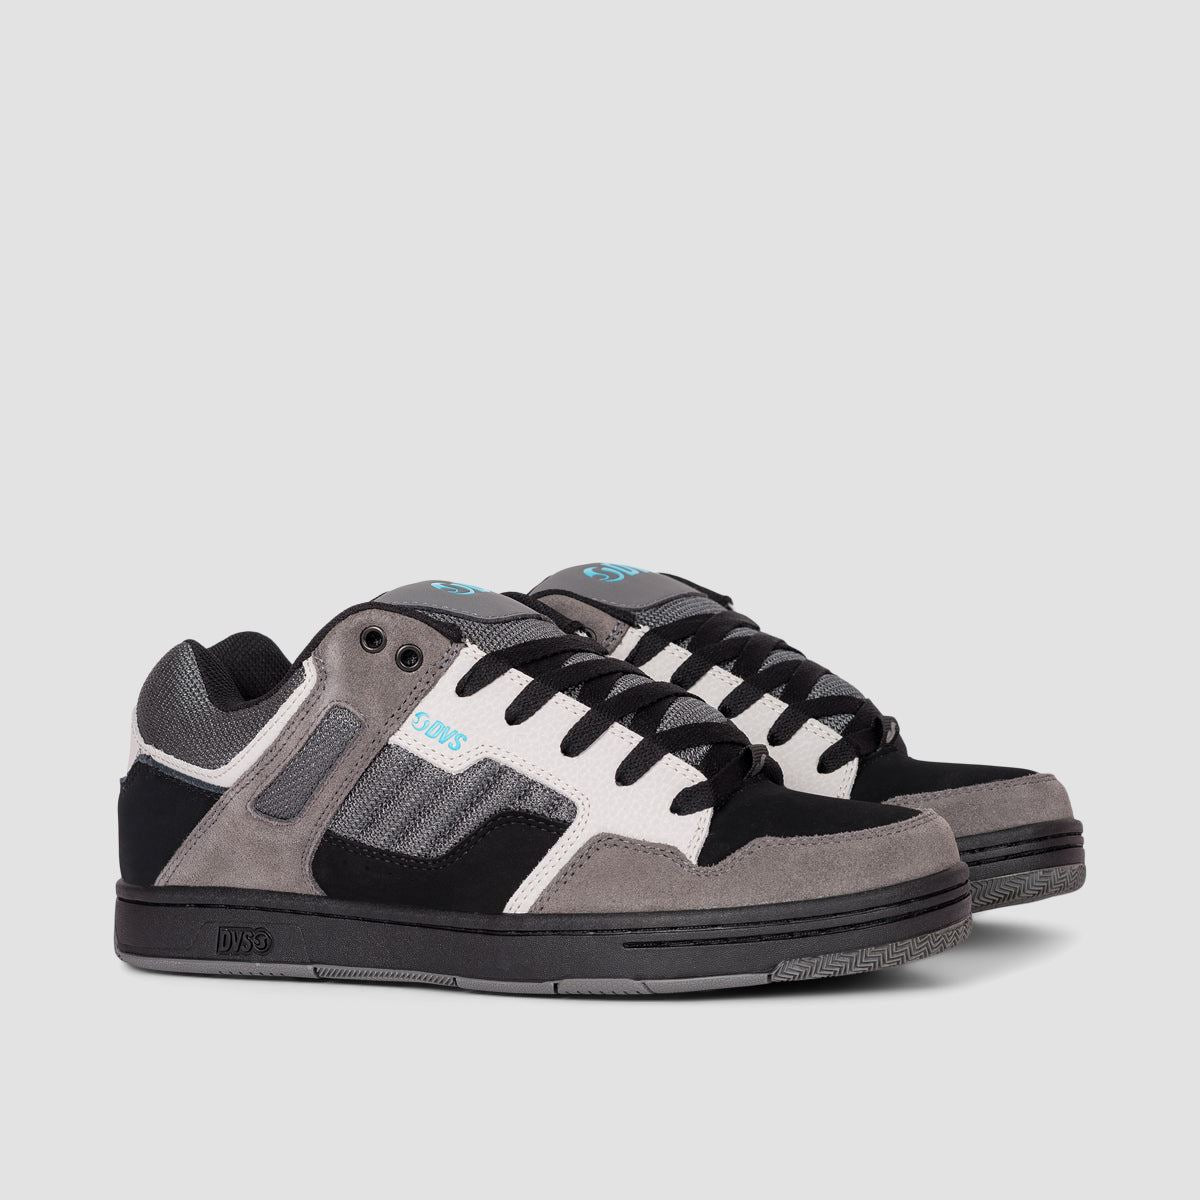 DVS Enduro 125 Shoes - Black/Charcoal/Turquoise/Suede